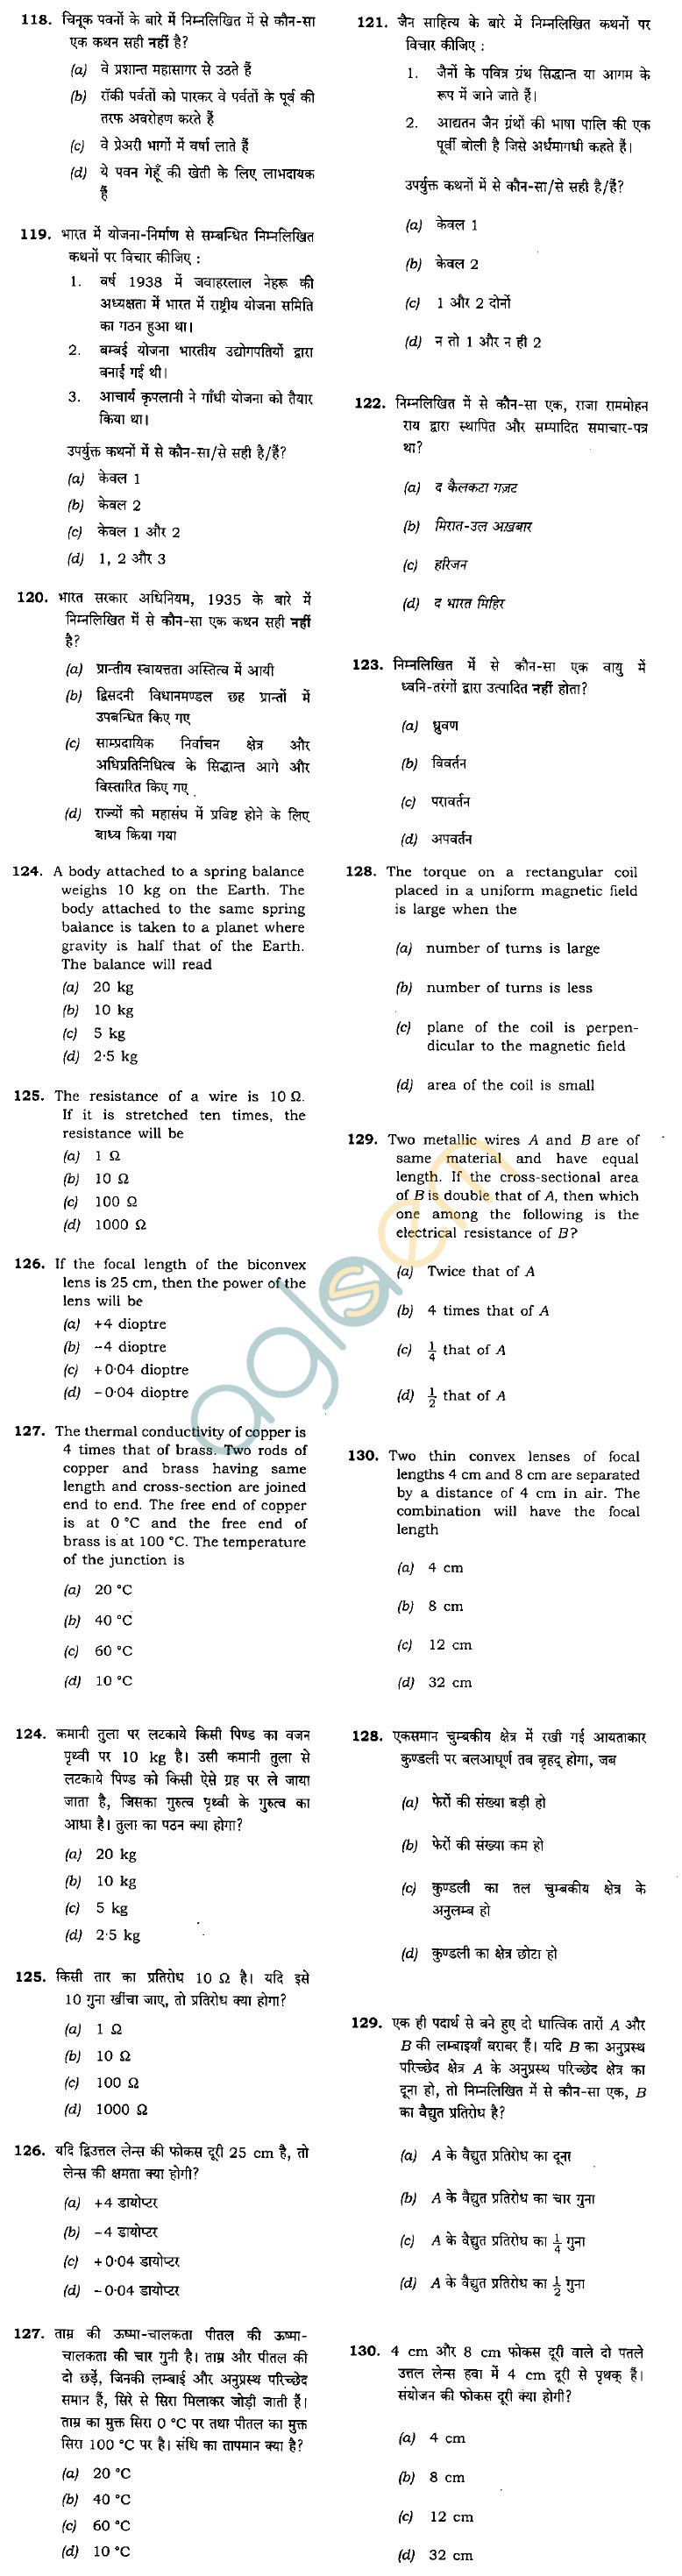 NDA & NA Exam (I) 2012: Previous Year Question Paper - General Ability Test